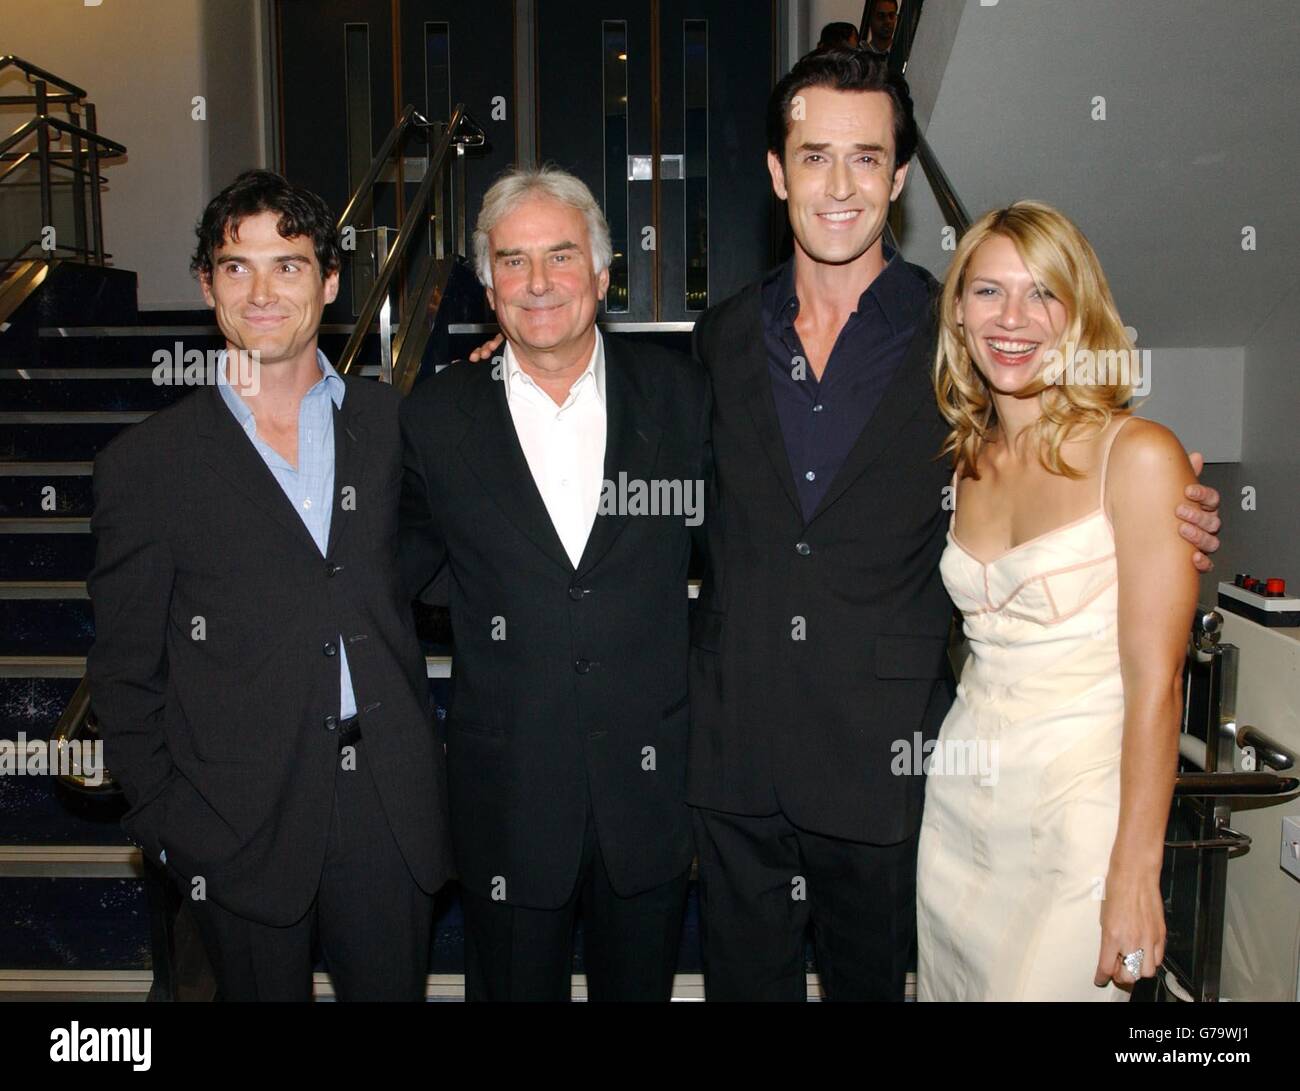 Director Richard Eyre (centre left) with stars of the film, Billy Crudup (far left), Rupert Everett and Claire Danes as they arrive for the London Charity premiere of Stage Beauty at the Odeon West End in central London in aid of The National Film and Television School. Stock Photo